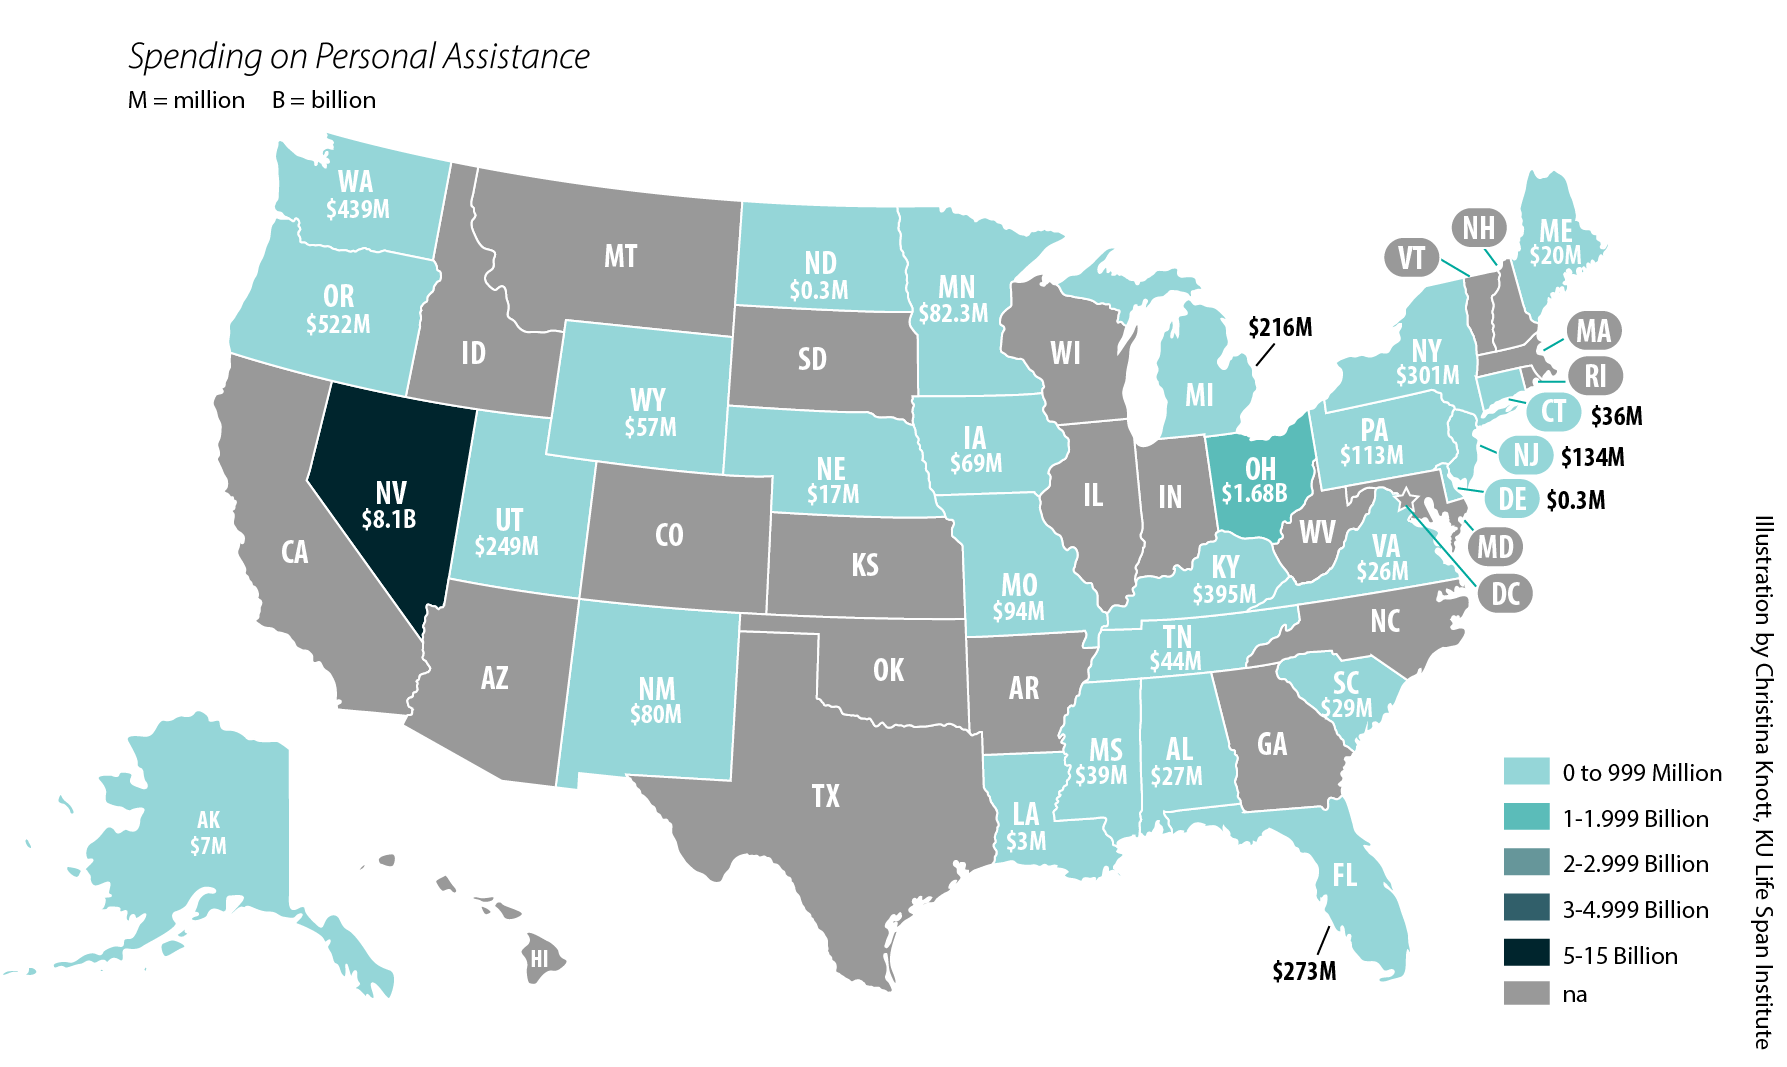 U.S. map showing spending on personal assistance